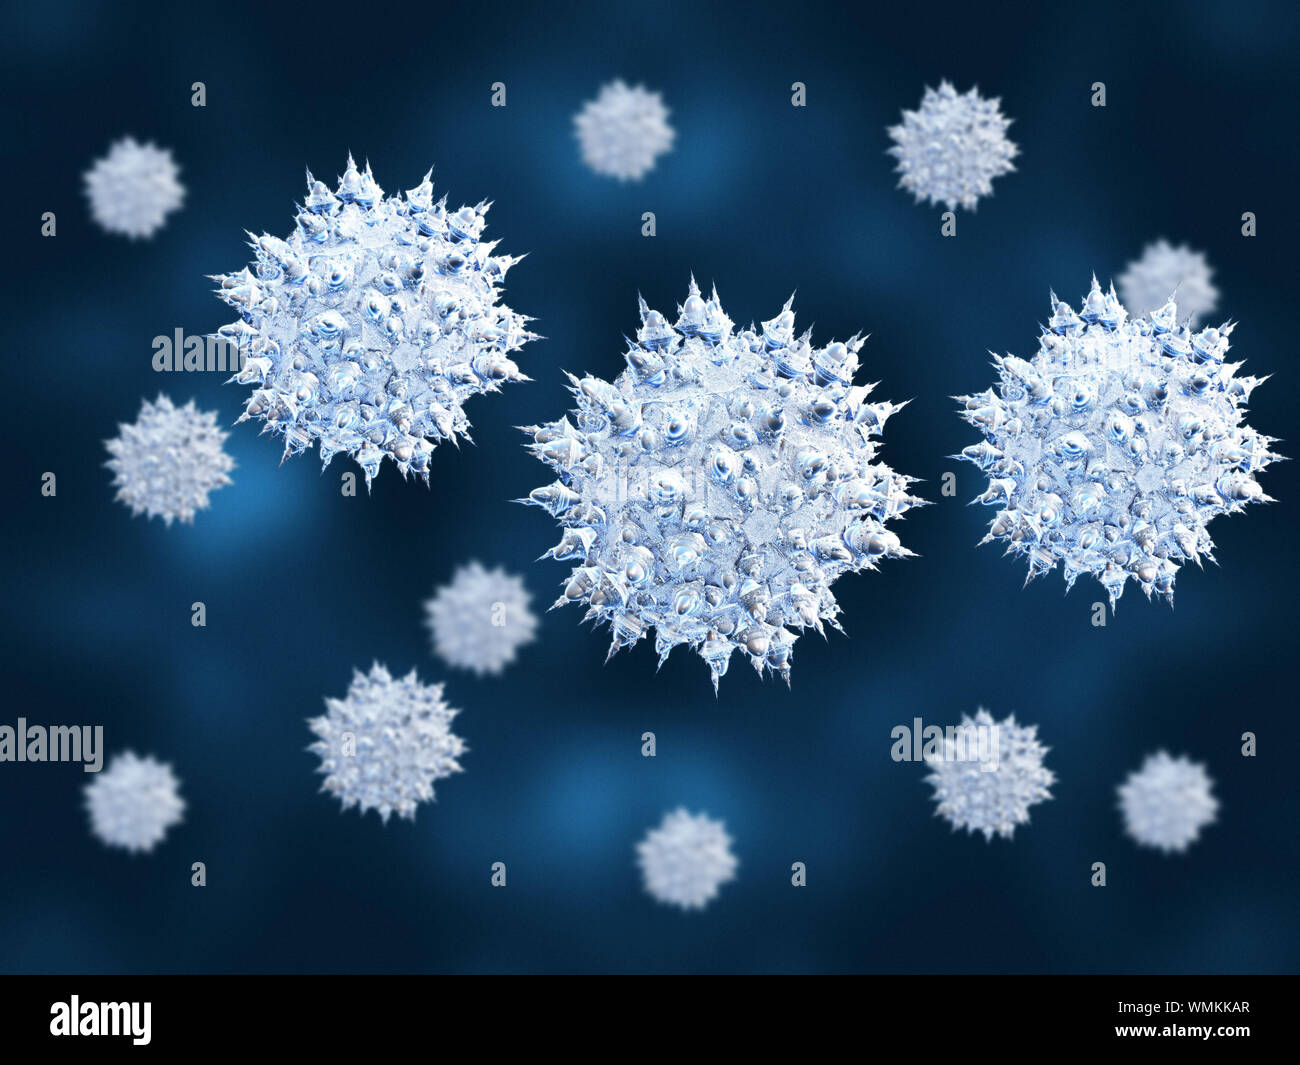 Abstract illustration of blue virus cells attack background. Stock Photo